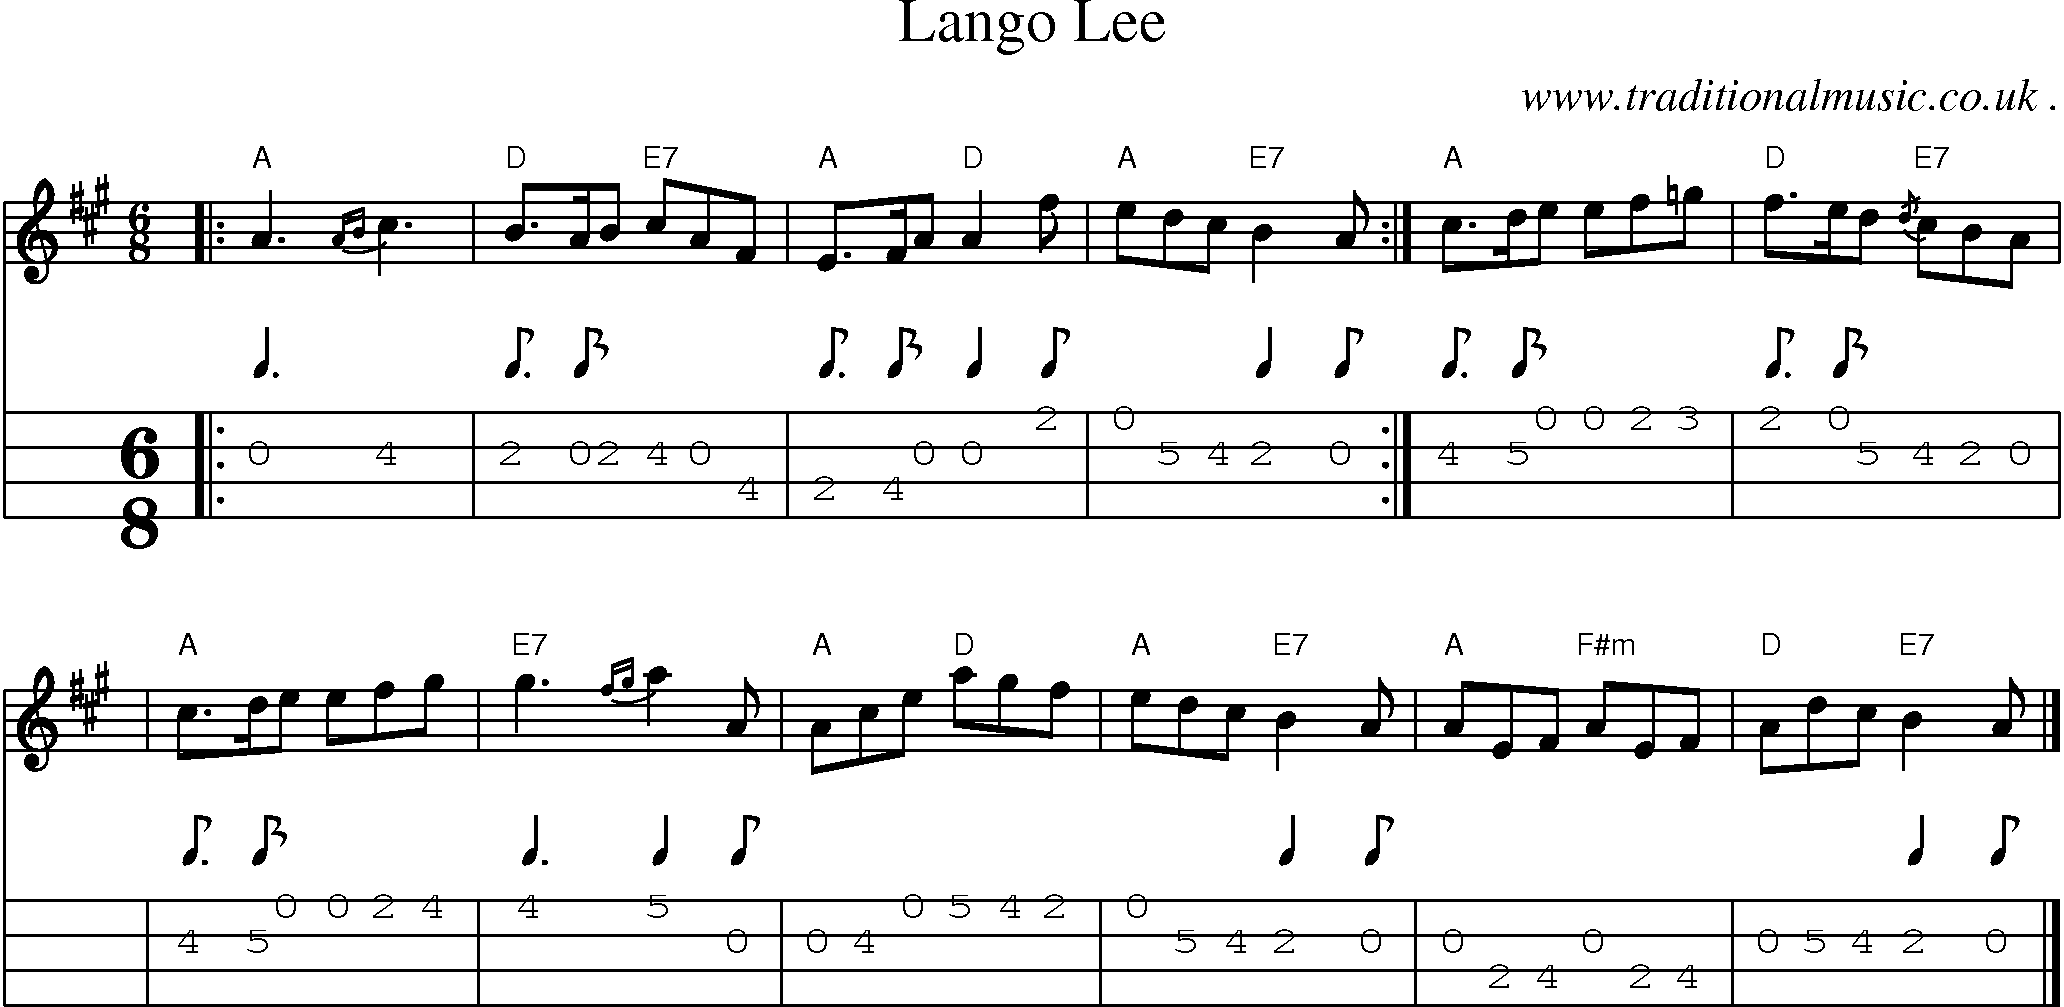 Sheet-music  score, Chords and Mandolin Tabs for Lango Lee